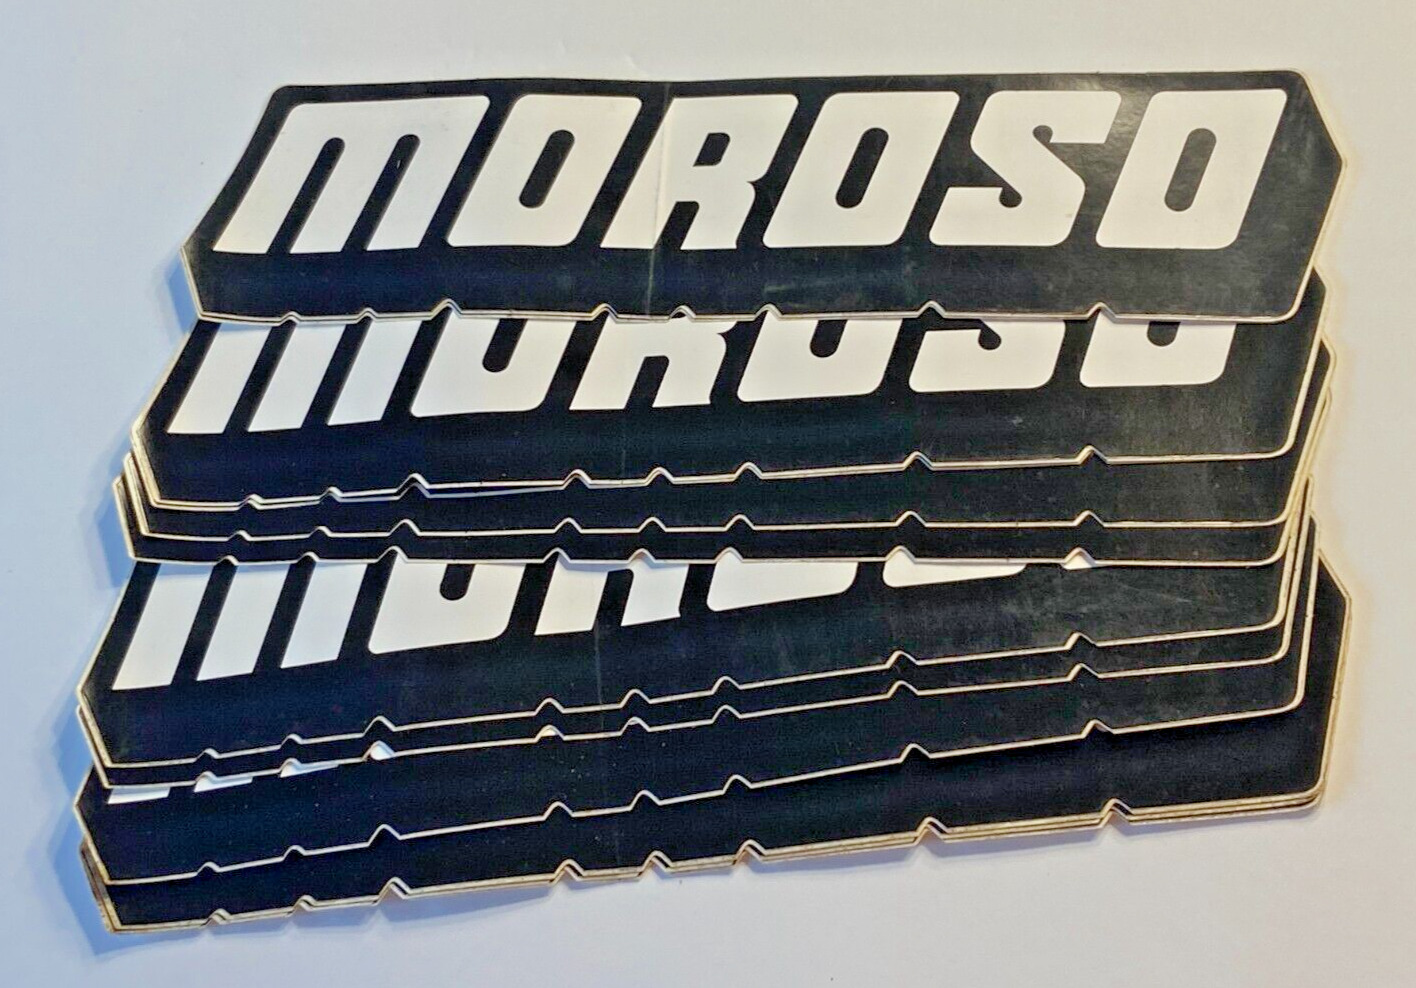 Lot of 12 NOS Moroso Racing Decal / Stickers